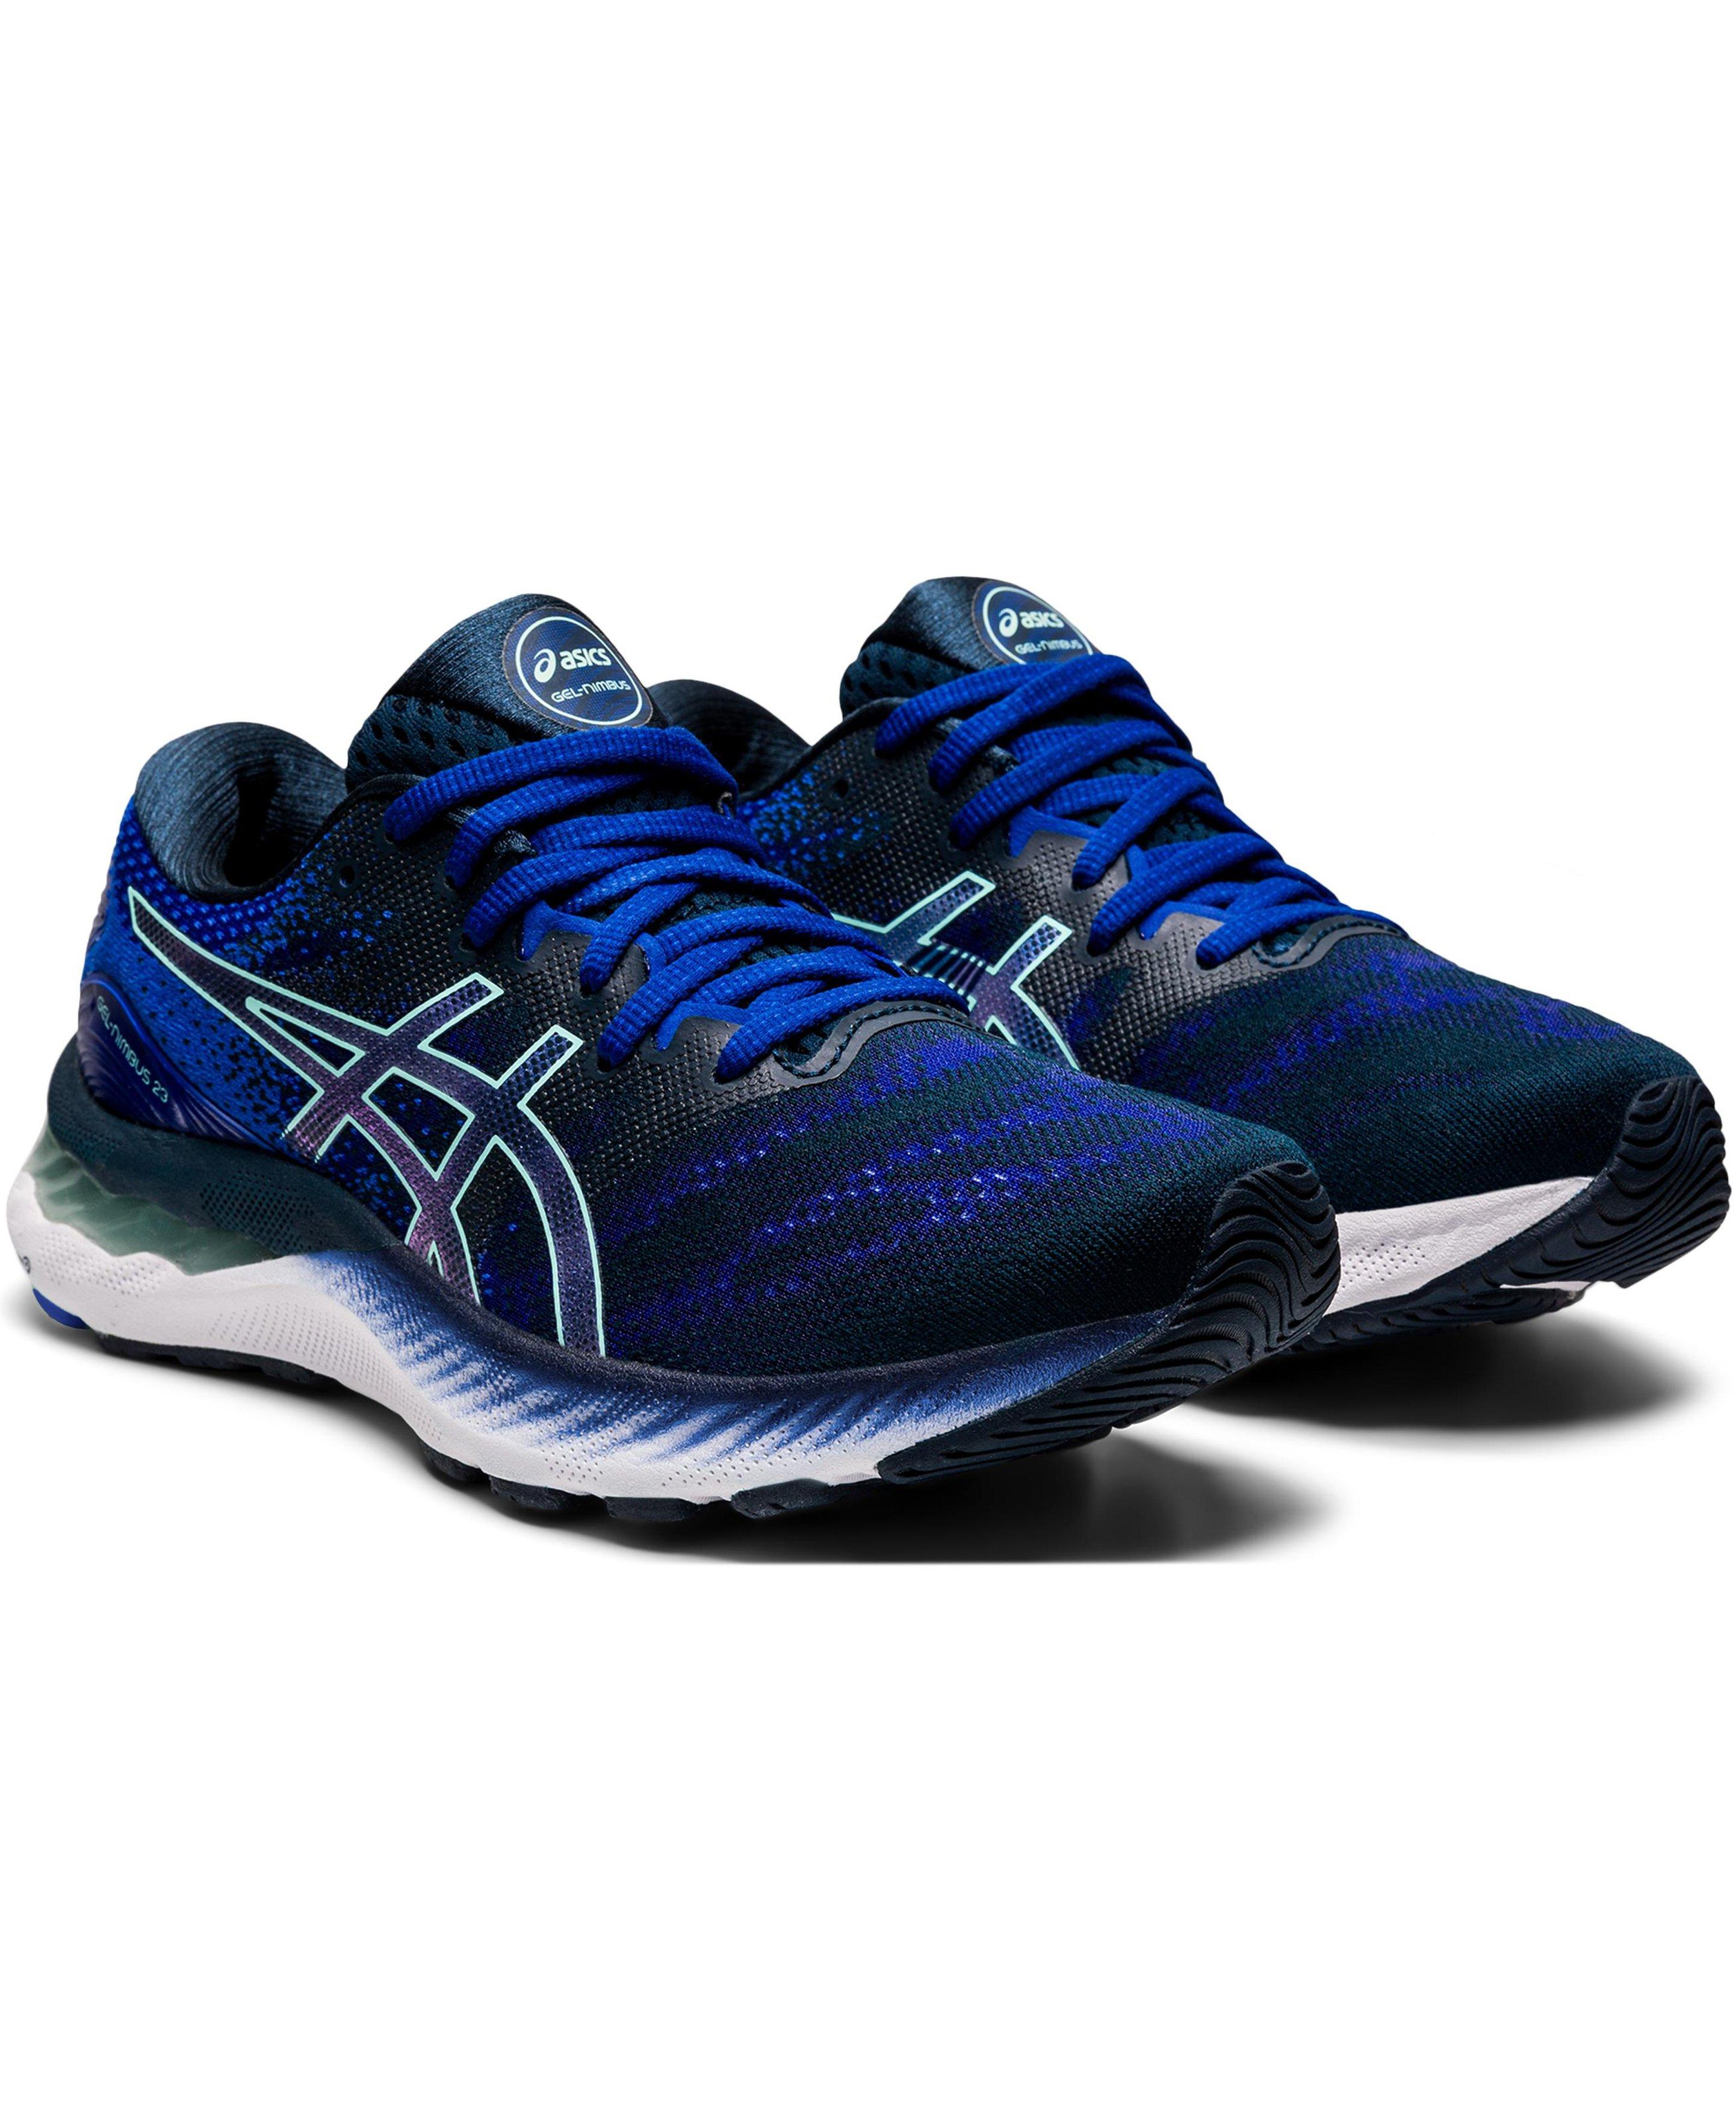 asics trainers for women